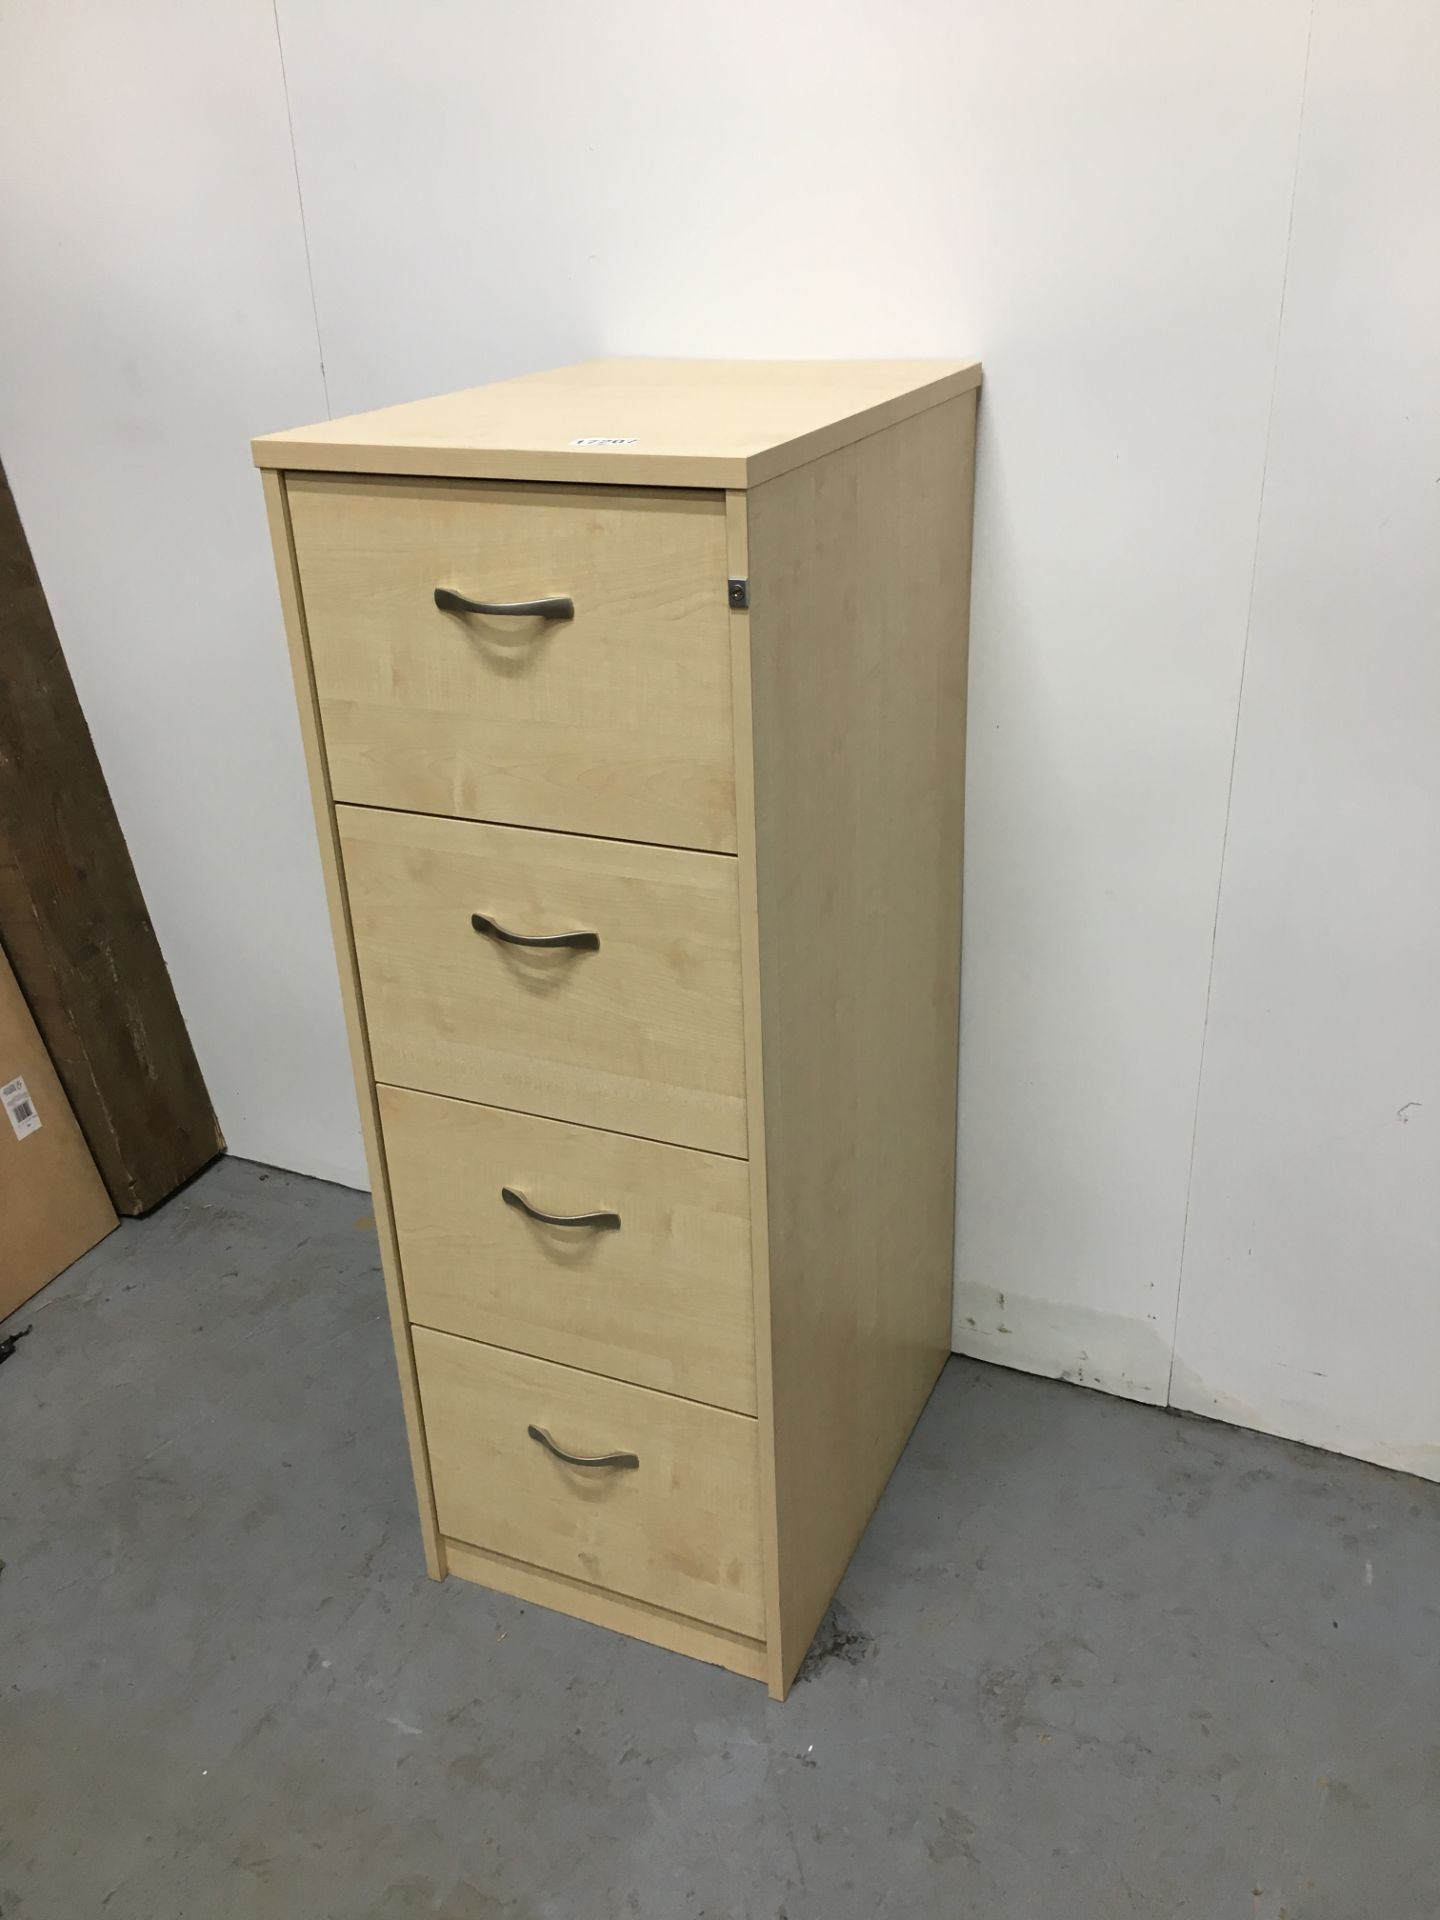 4x 4 Drawer Filing Cabinets in Beech Wood Finish - Image 2 of 2